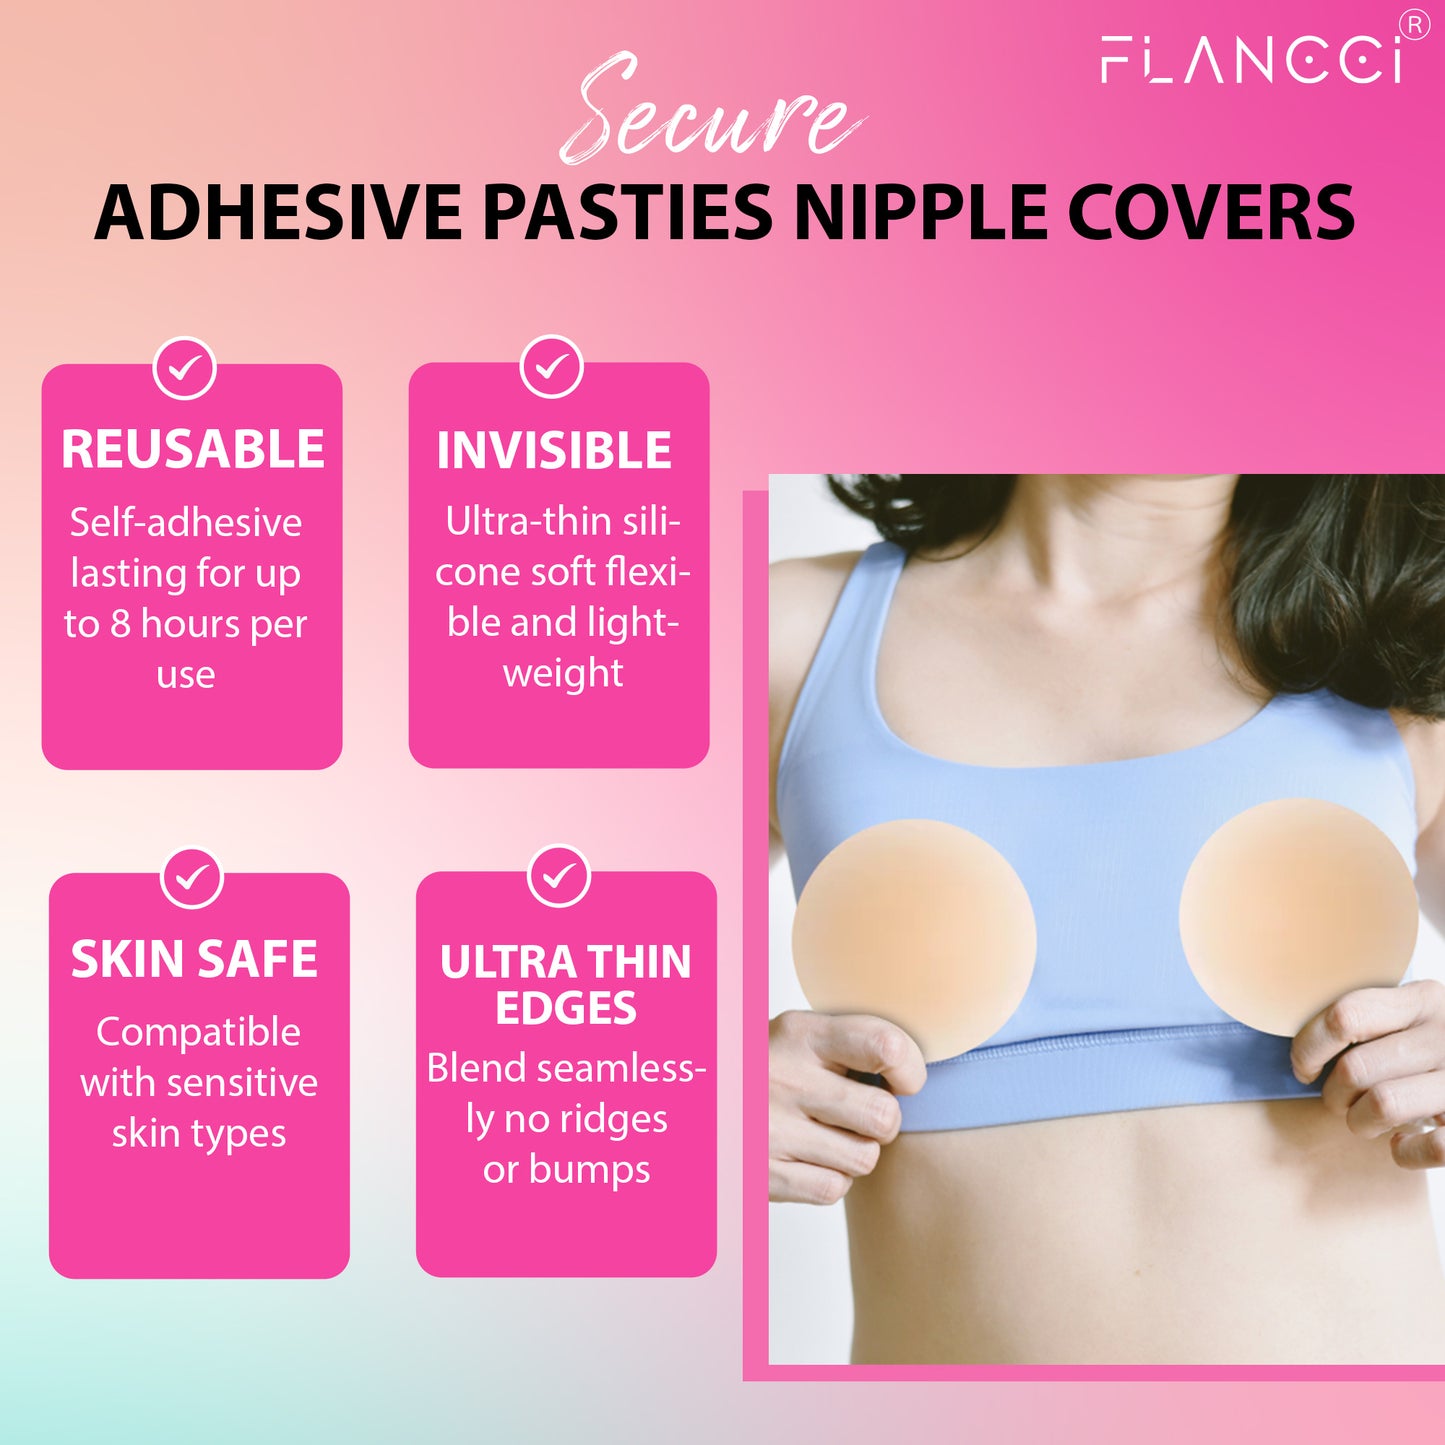 Nipple Cover Silicone Nipple Pasties for Women, Pasties Nipple Covers Sticky Boobs, Reusable Waterproof Breast Petals Nippies lift Cups, Adhesive Silicone Breast Pasties Invisible Bra (One-Pair)